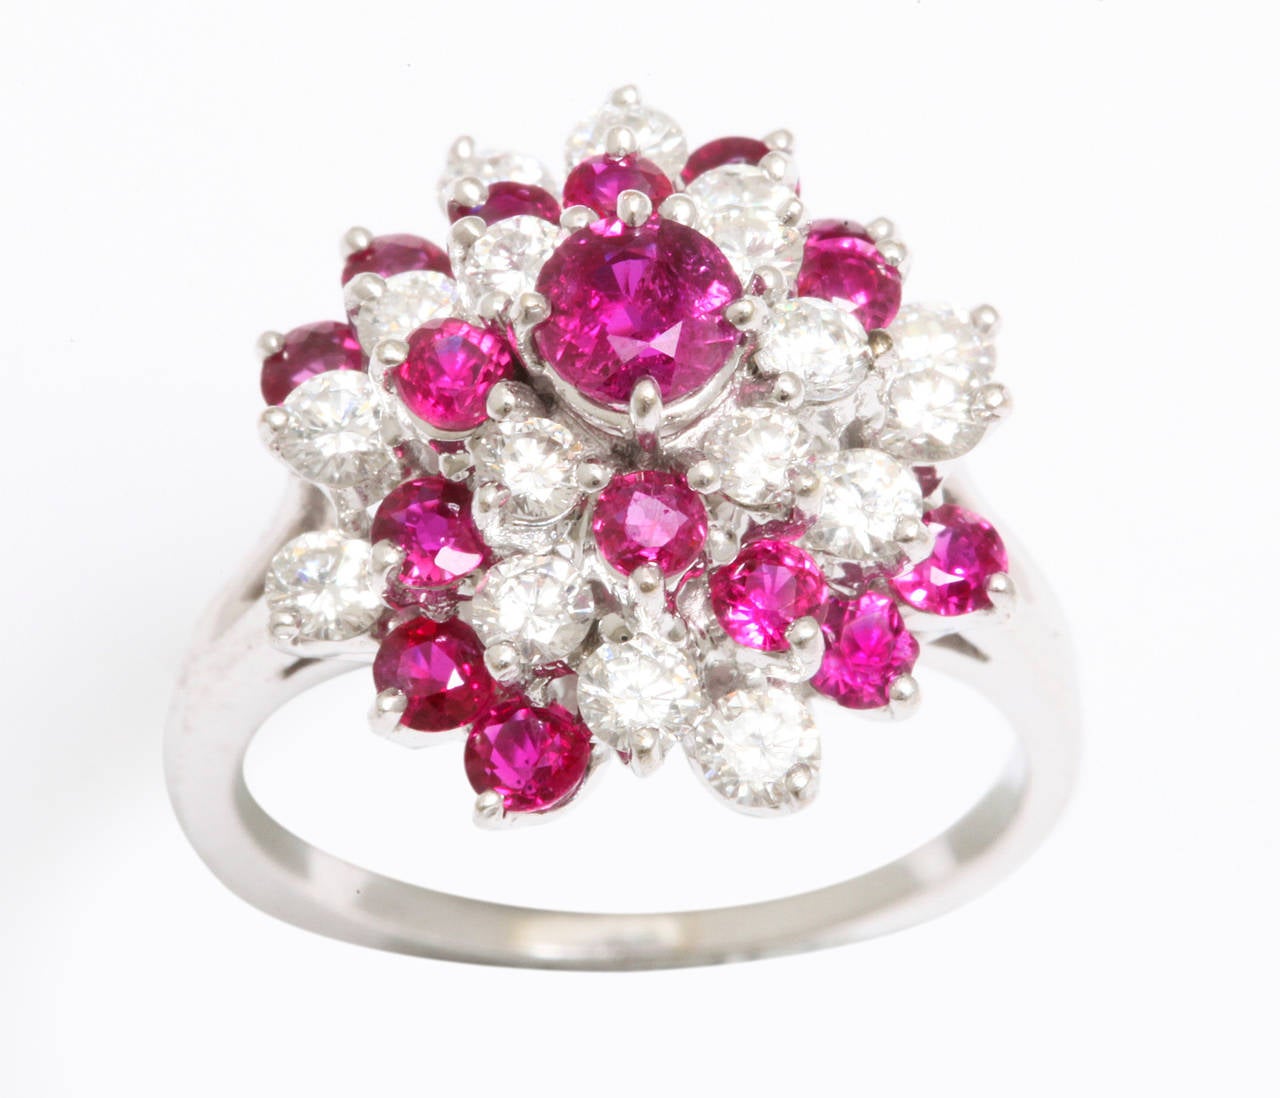 Bright red ruby and sparkling diamond cocktail ring.  The ring is very three dimensional and has great volume.  Comfortable to wear and a pleasure to see.
